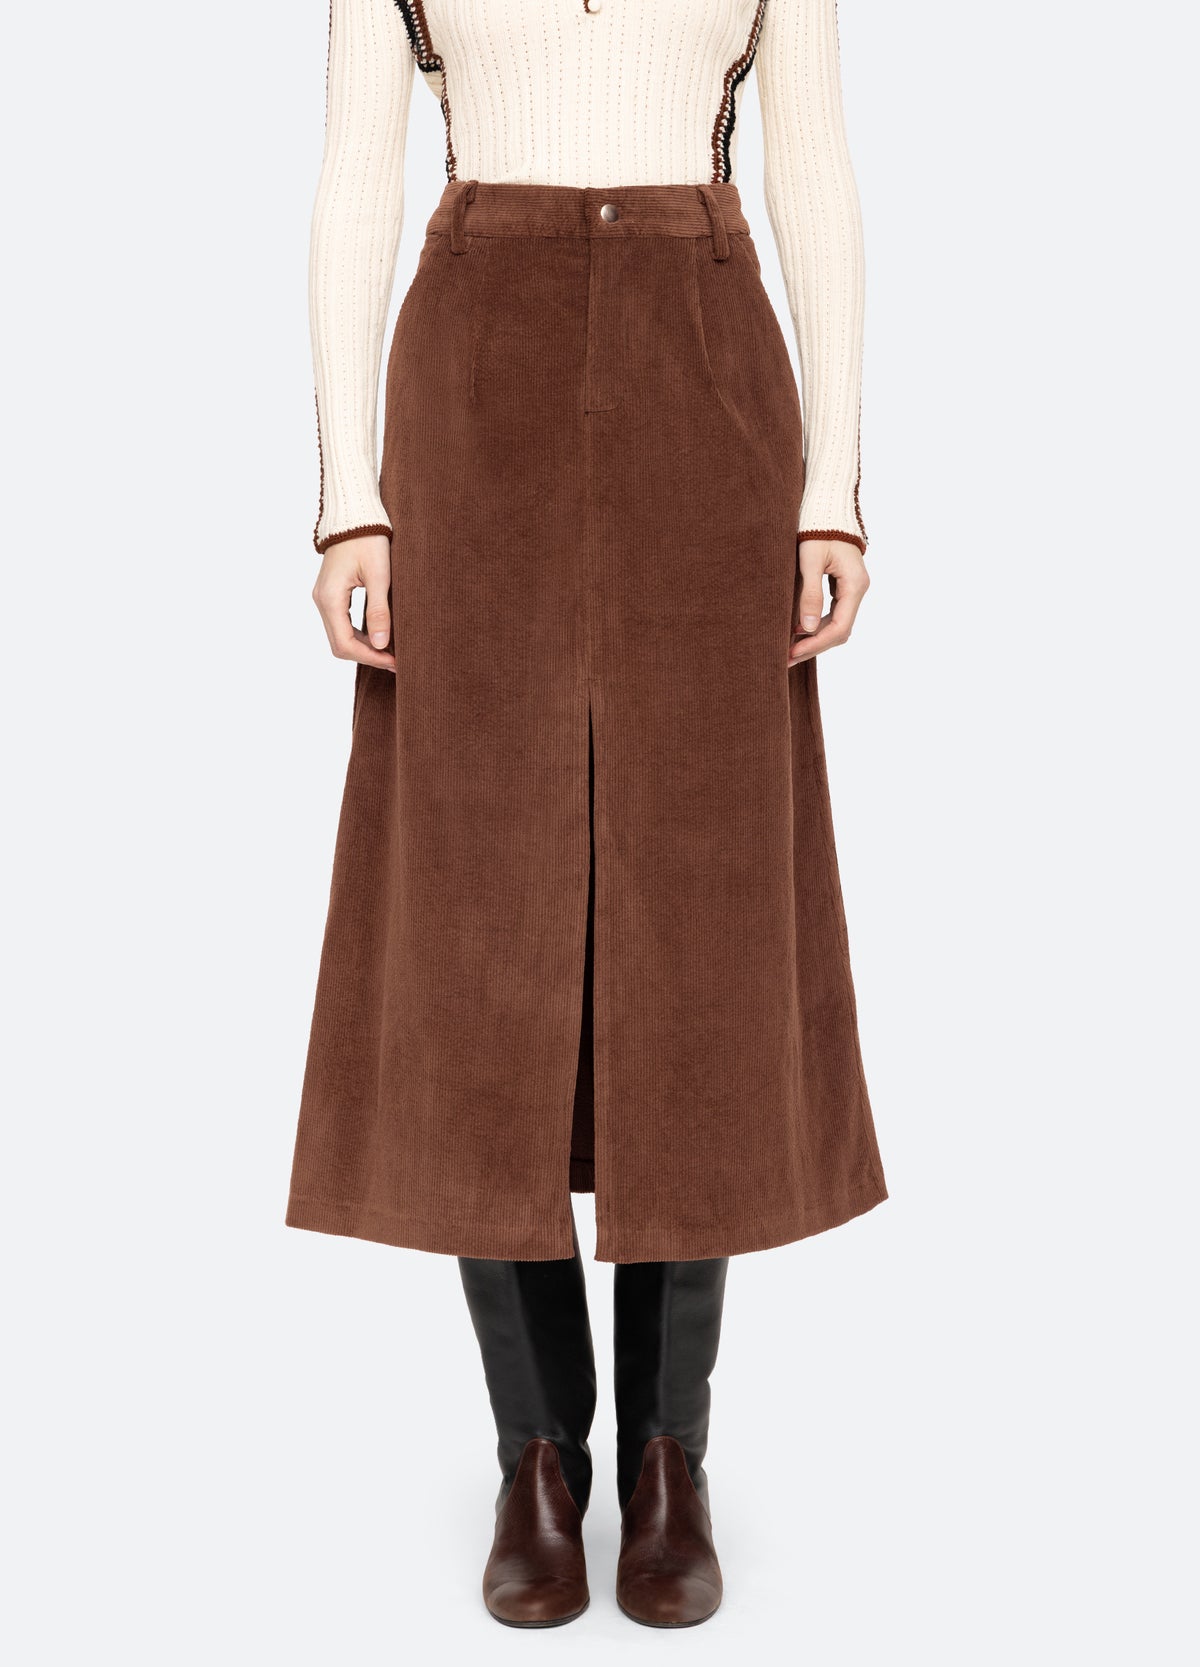 brown-cooper skirt-front view